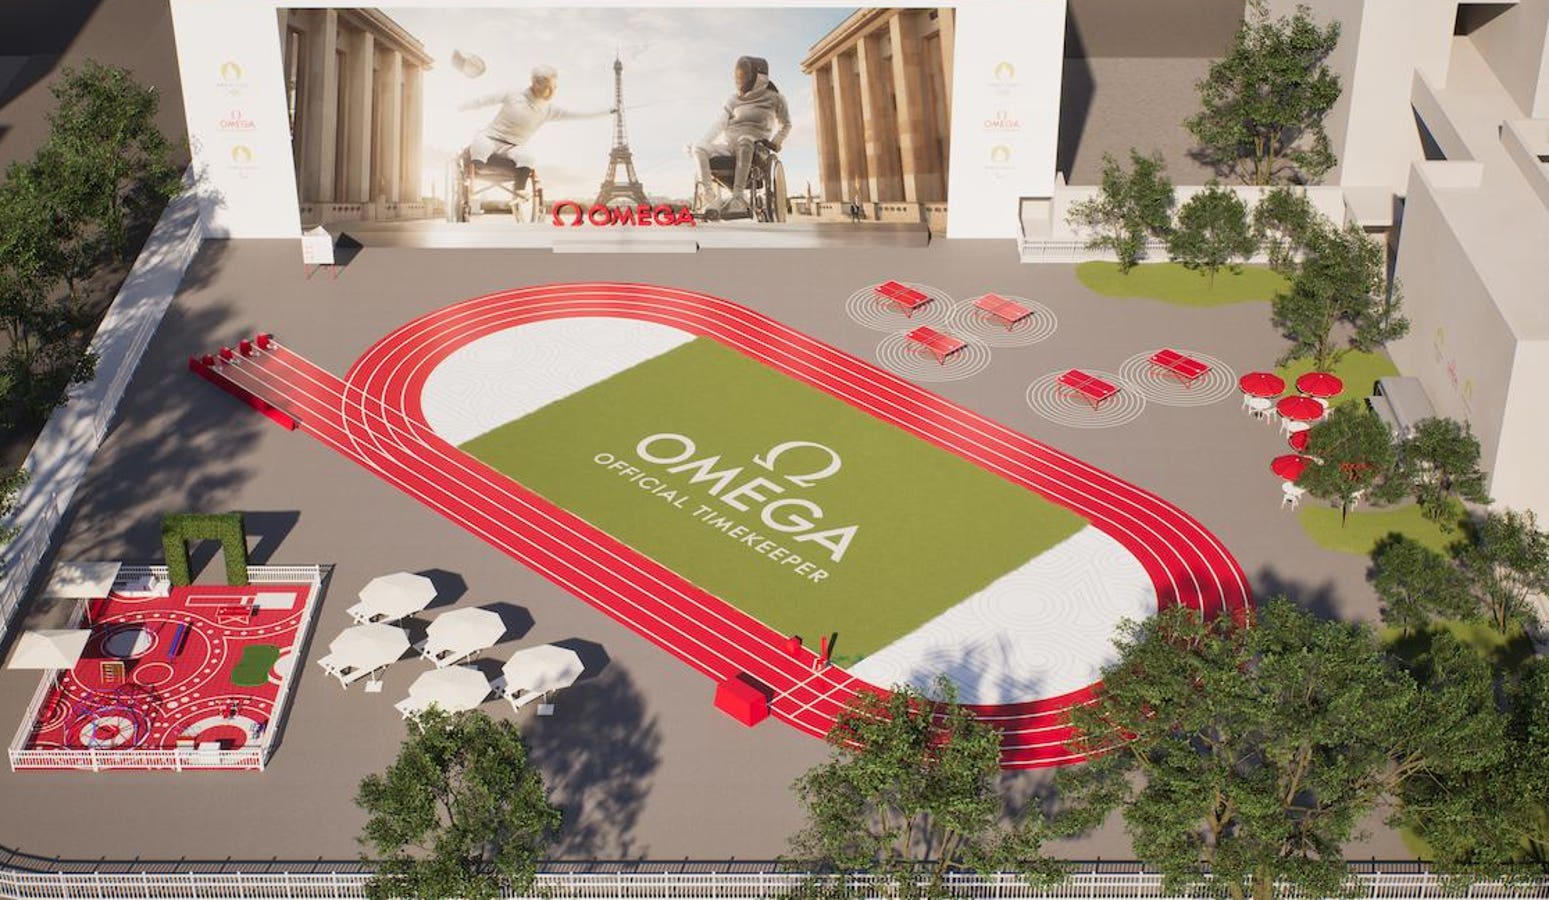 In Honor Of The Paris 2024 Olympics, Omega Builds Olympic Playground In Miami